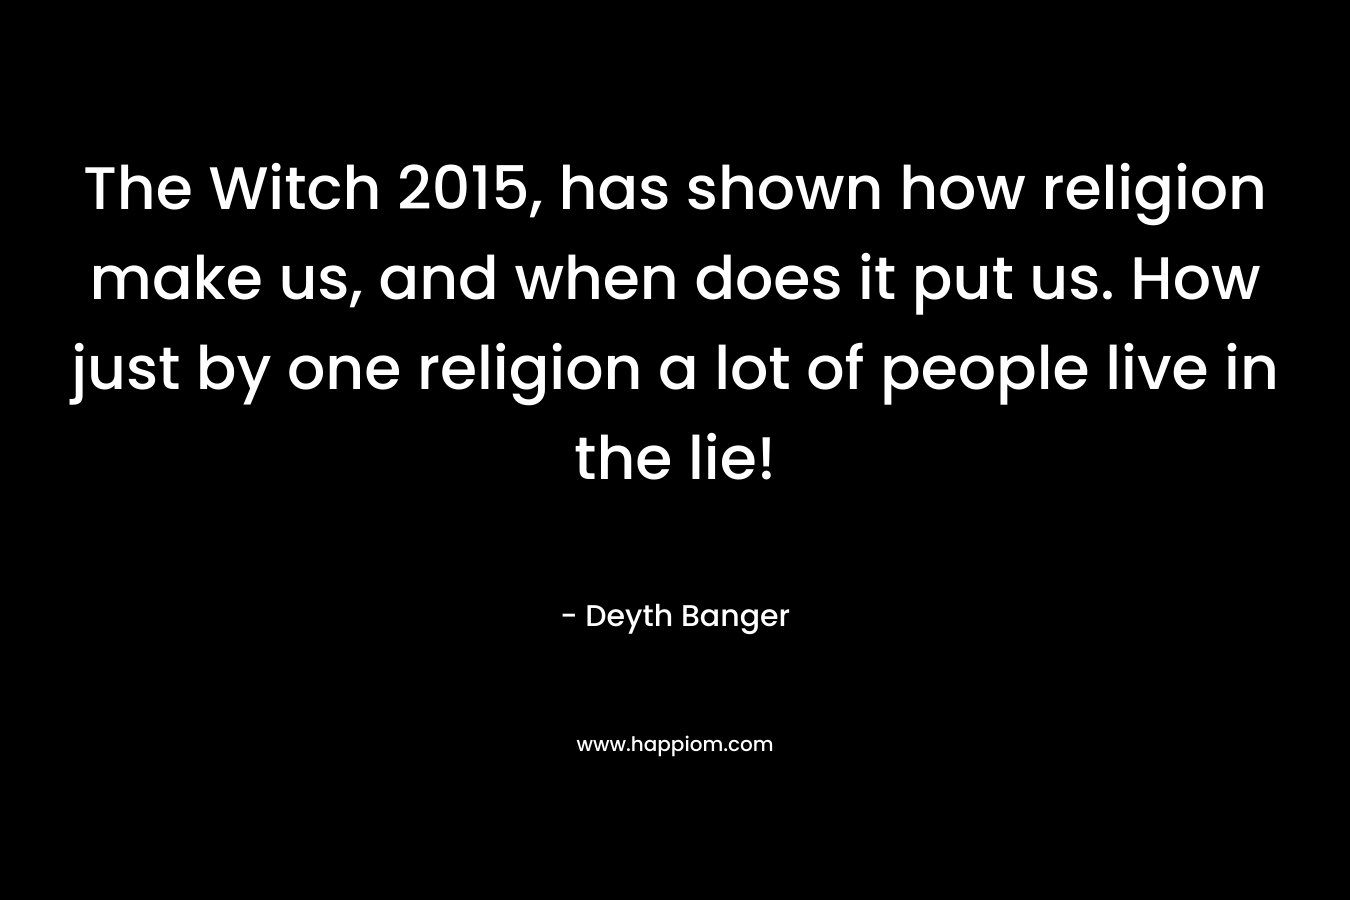 The Witch 2015, has shown how religion make us, and when does it put us. How just by one religion a lot of people live in the lie! – Deyth Banger